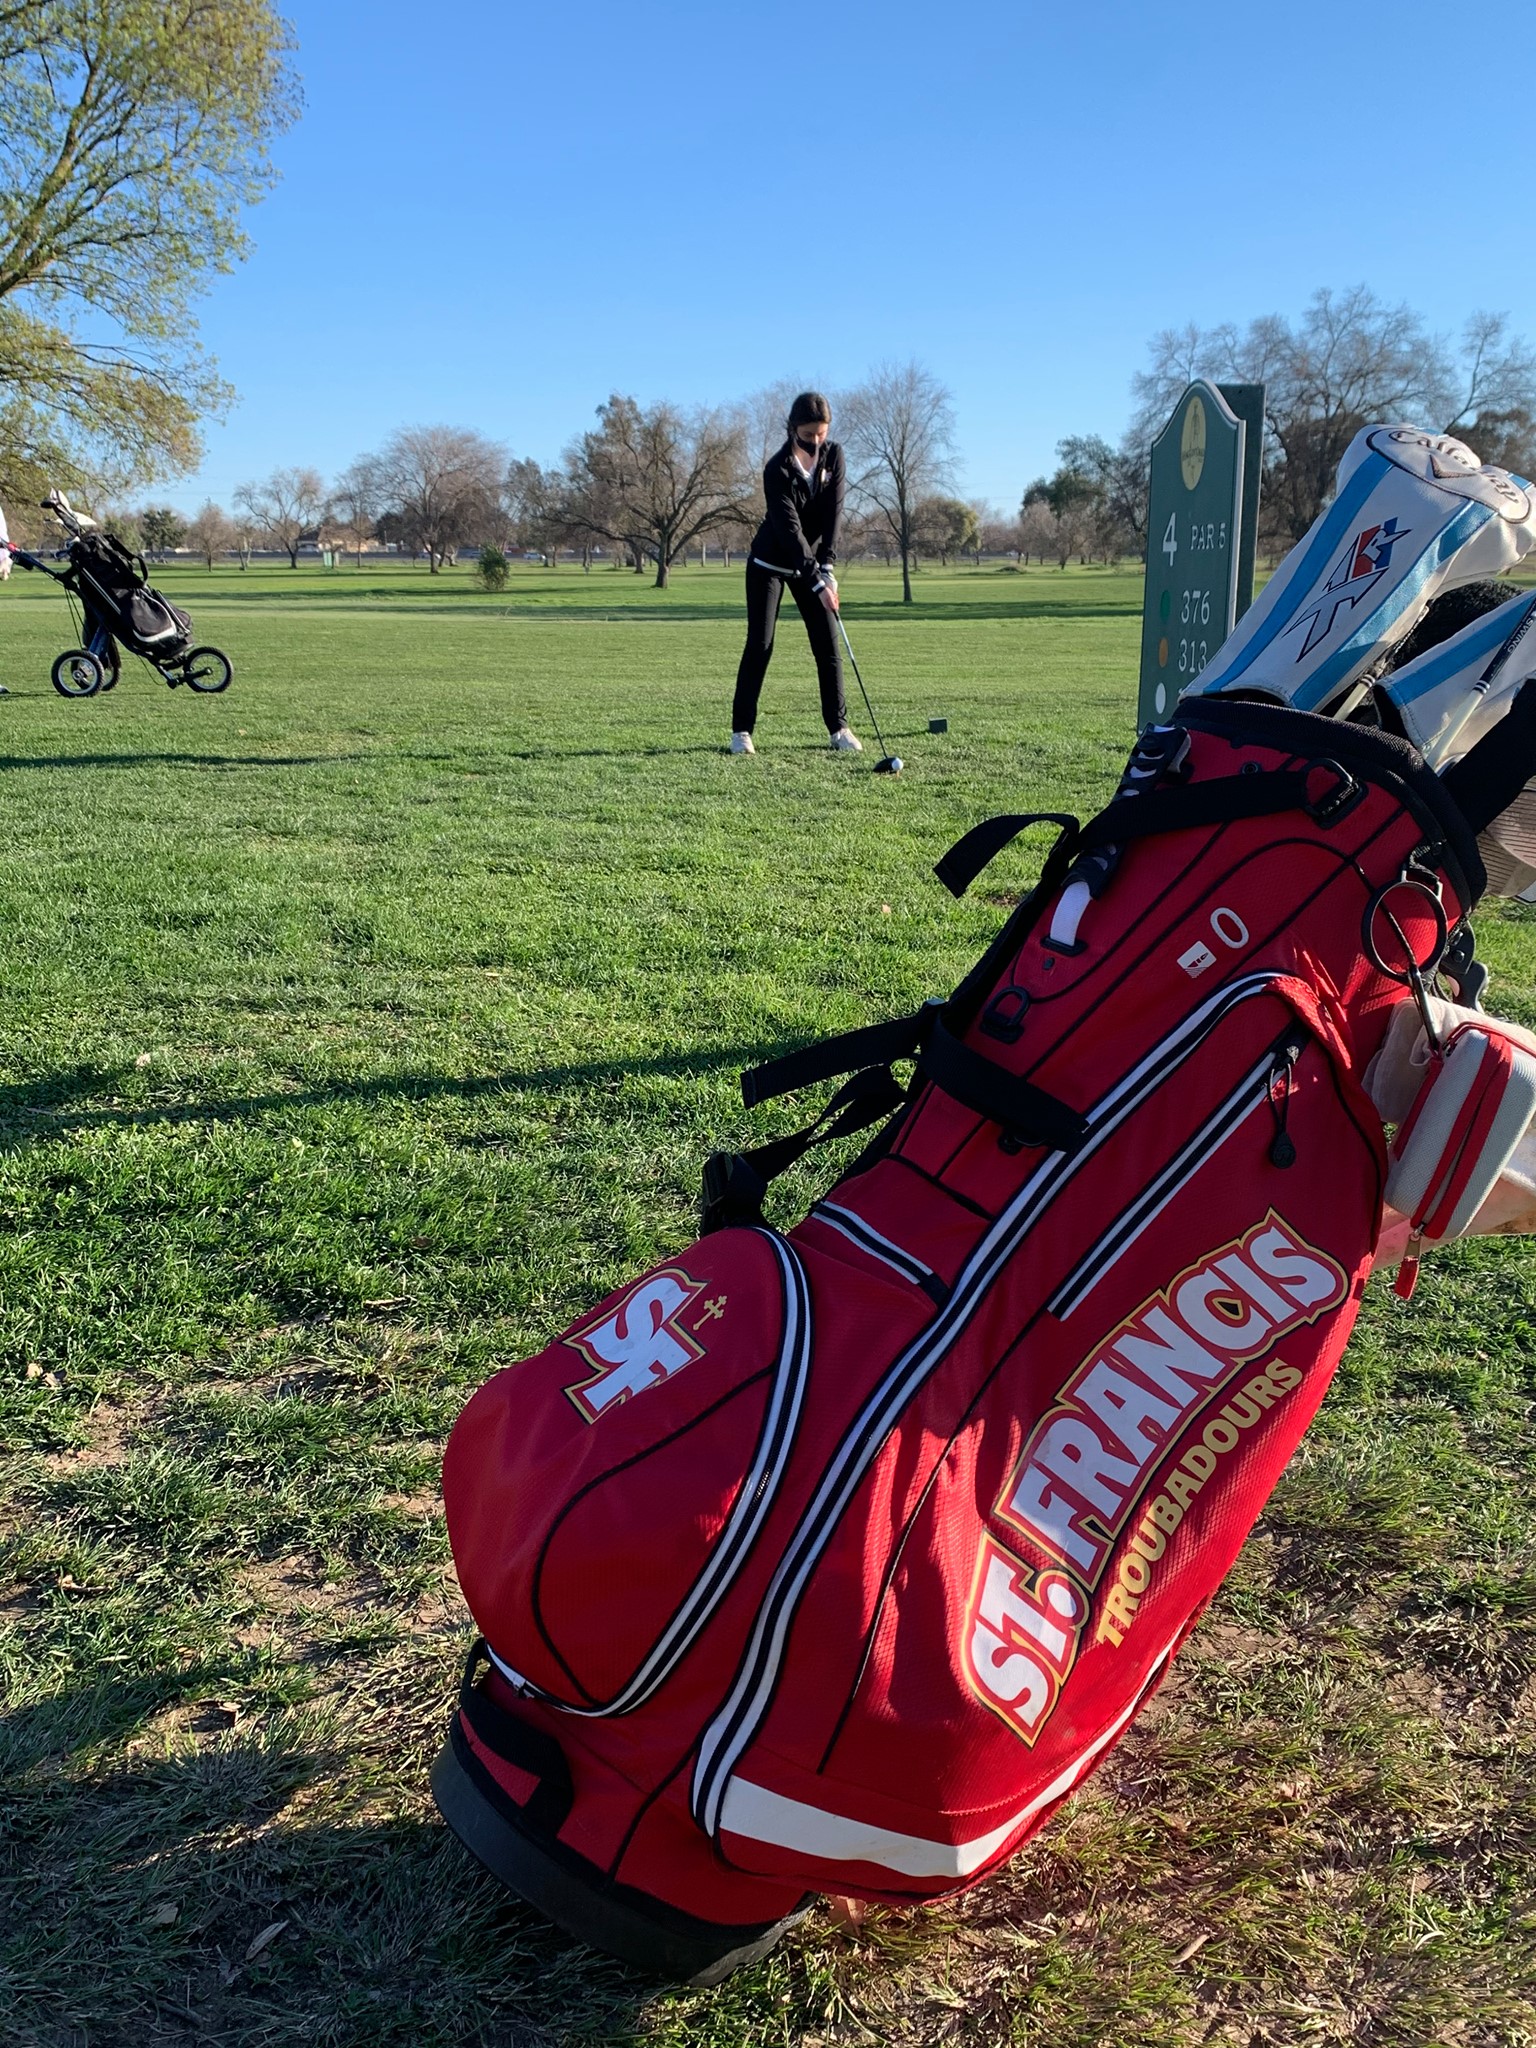 Troubie Golfers Open Year With Victory Over Sheldon